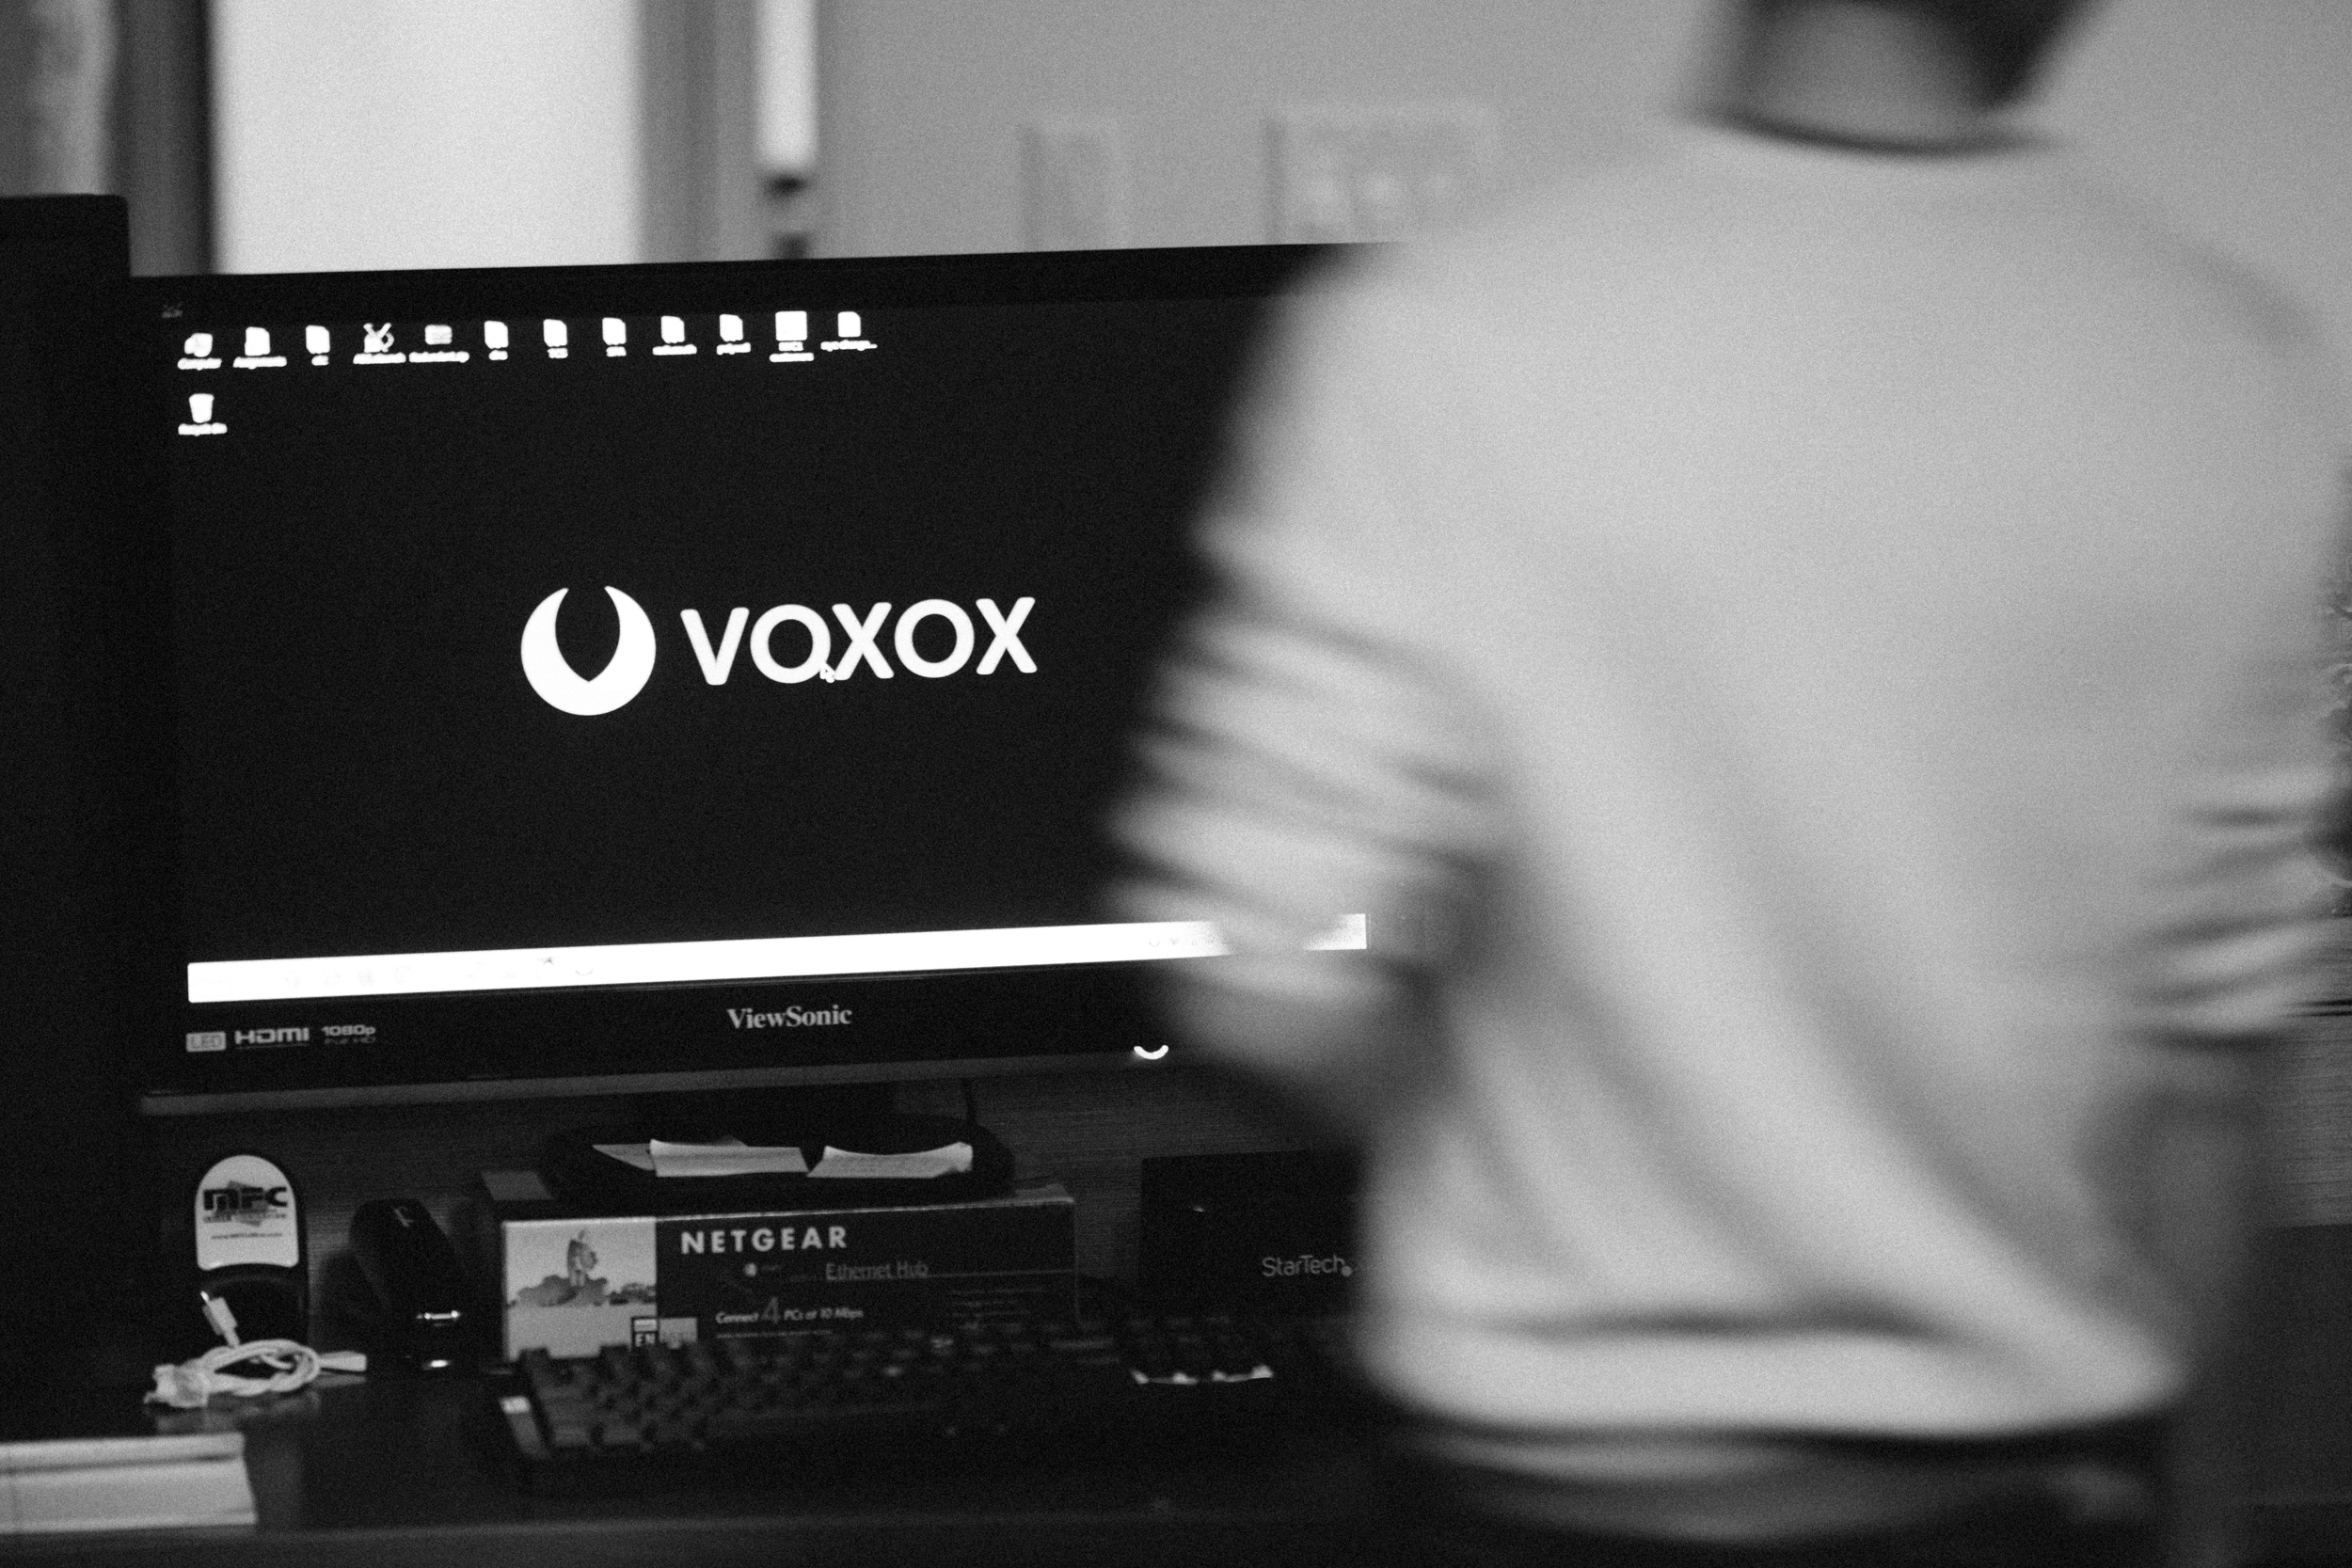 voxox review 2014